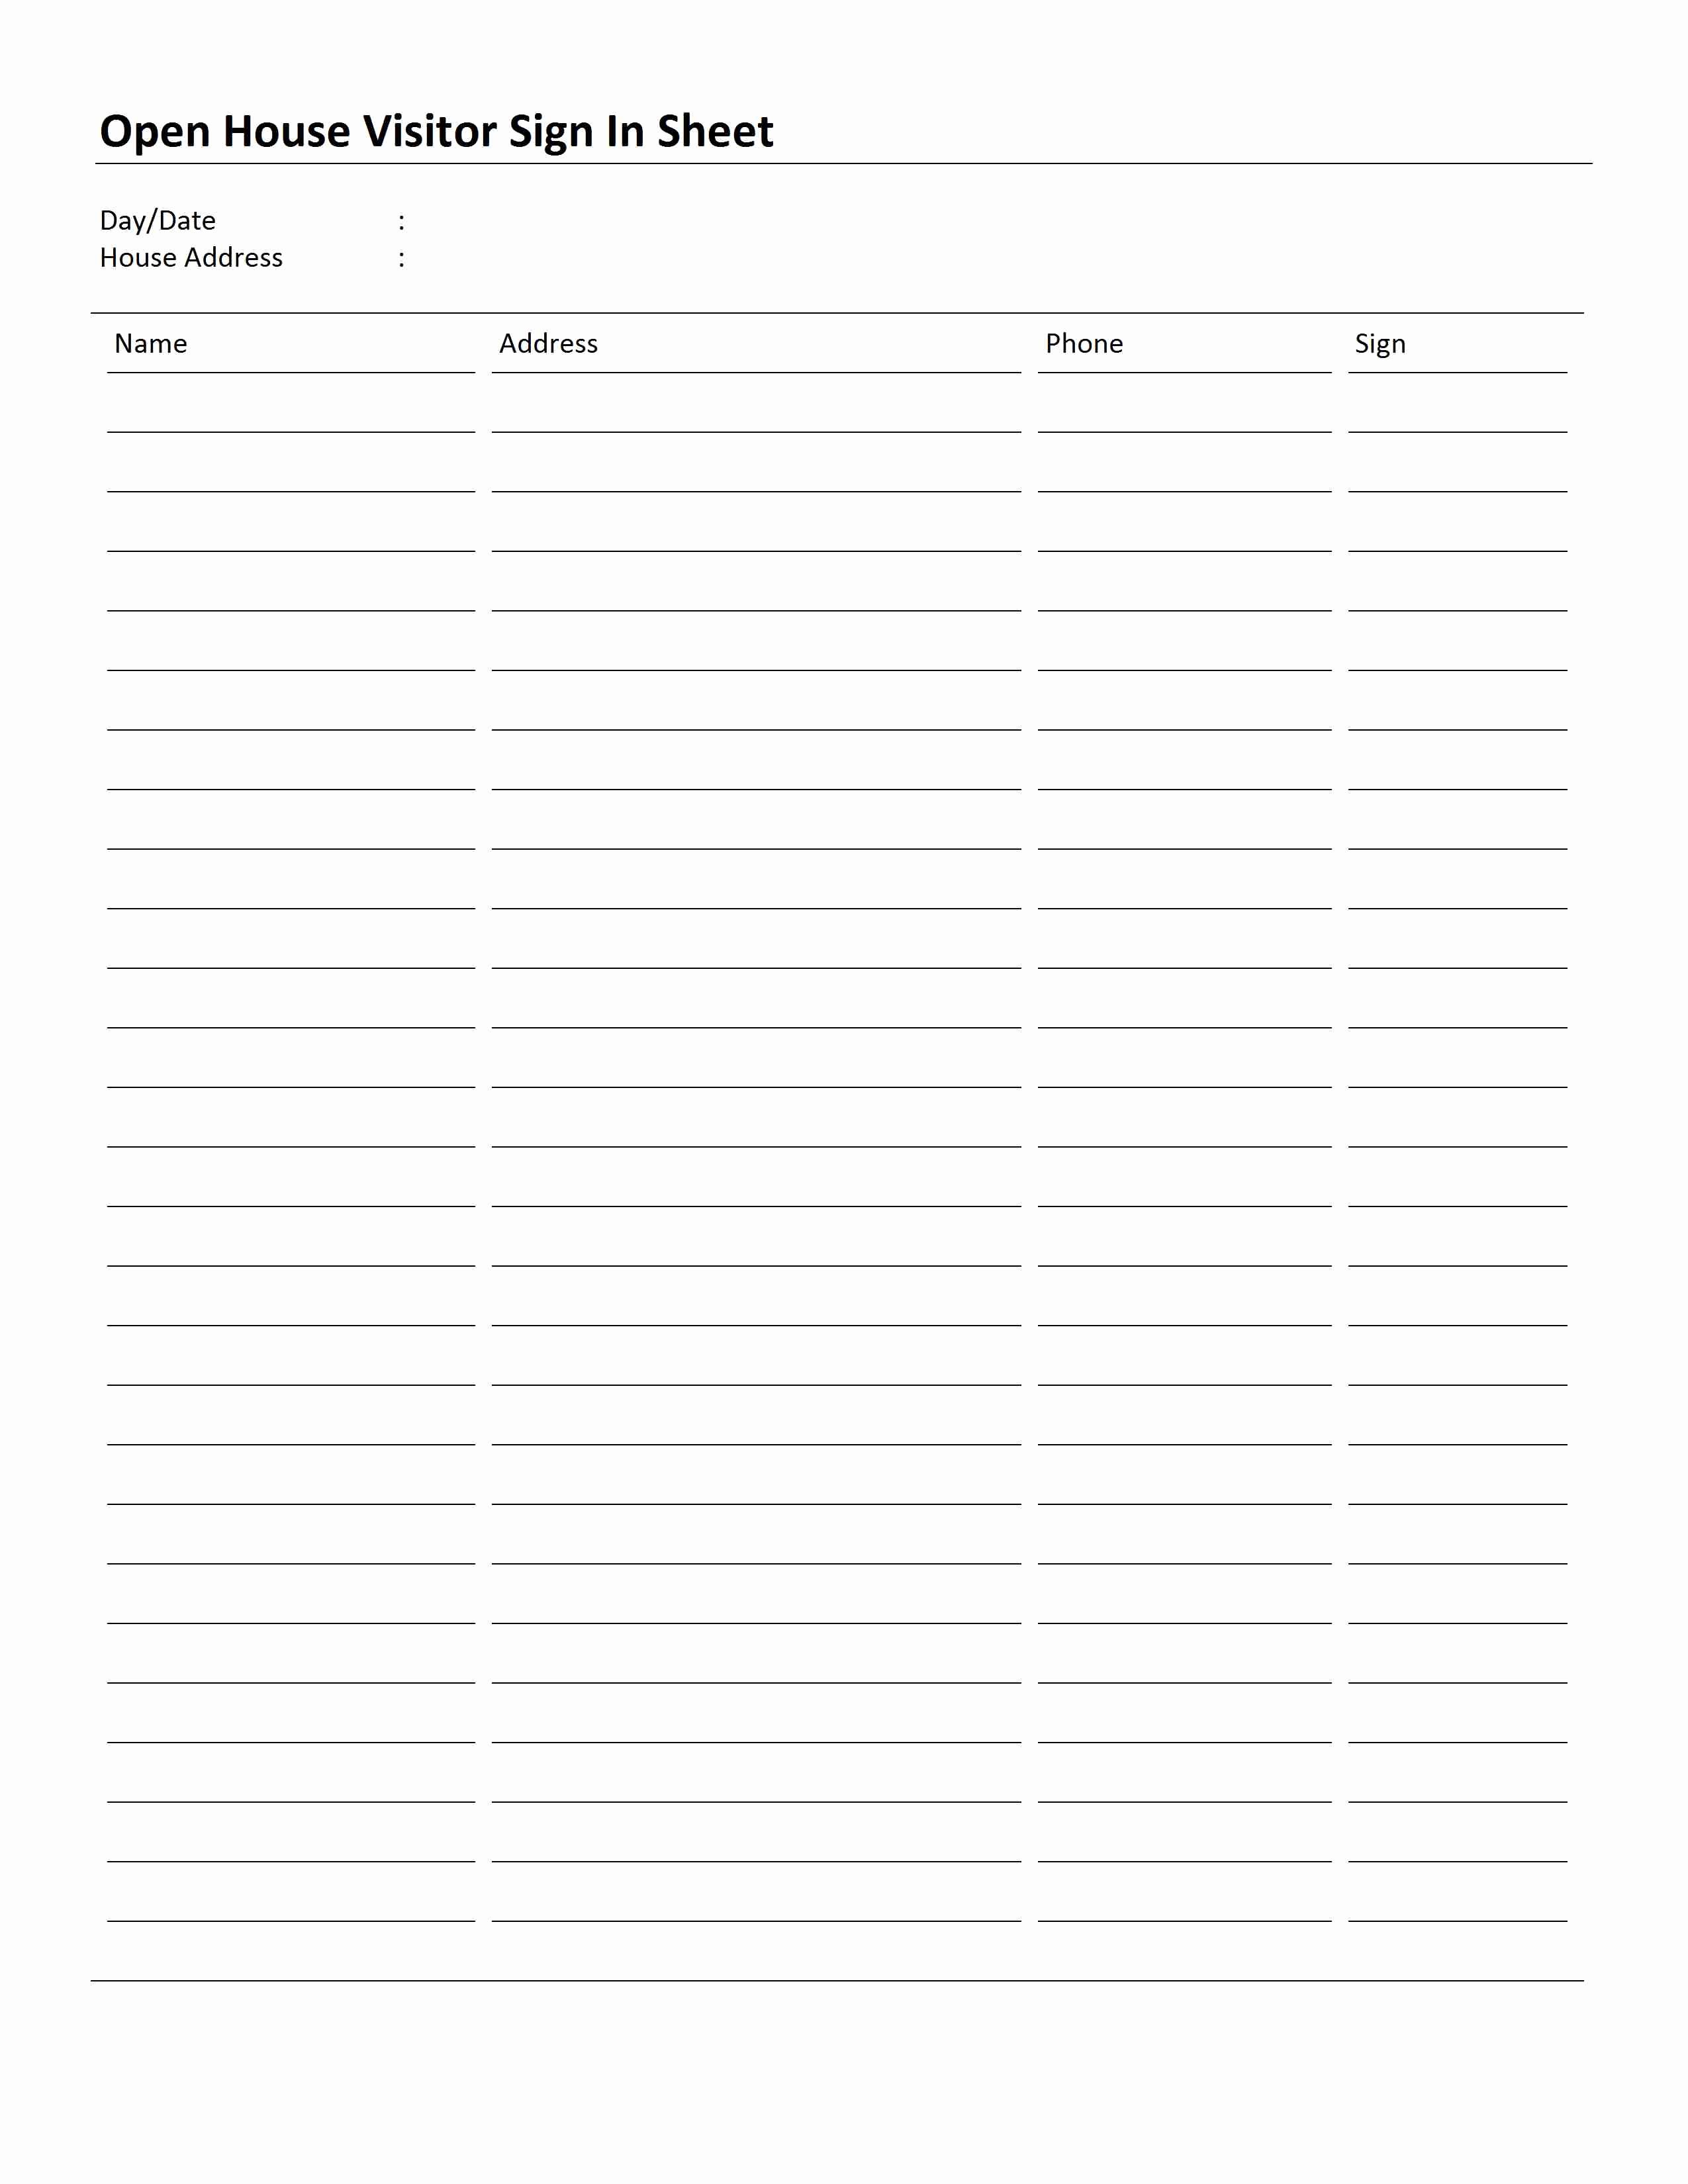 Open House Sign In Template Best Of Open House Sign In Sheet